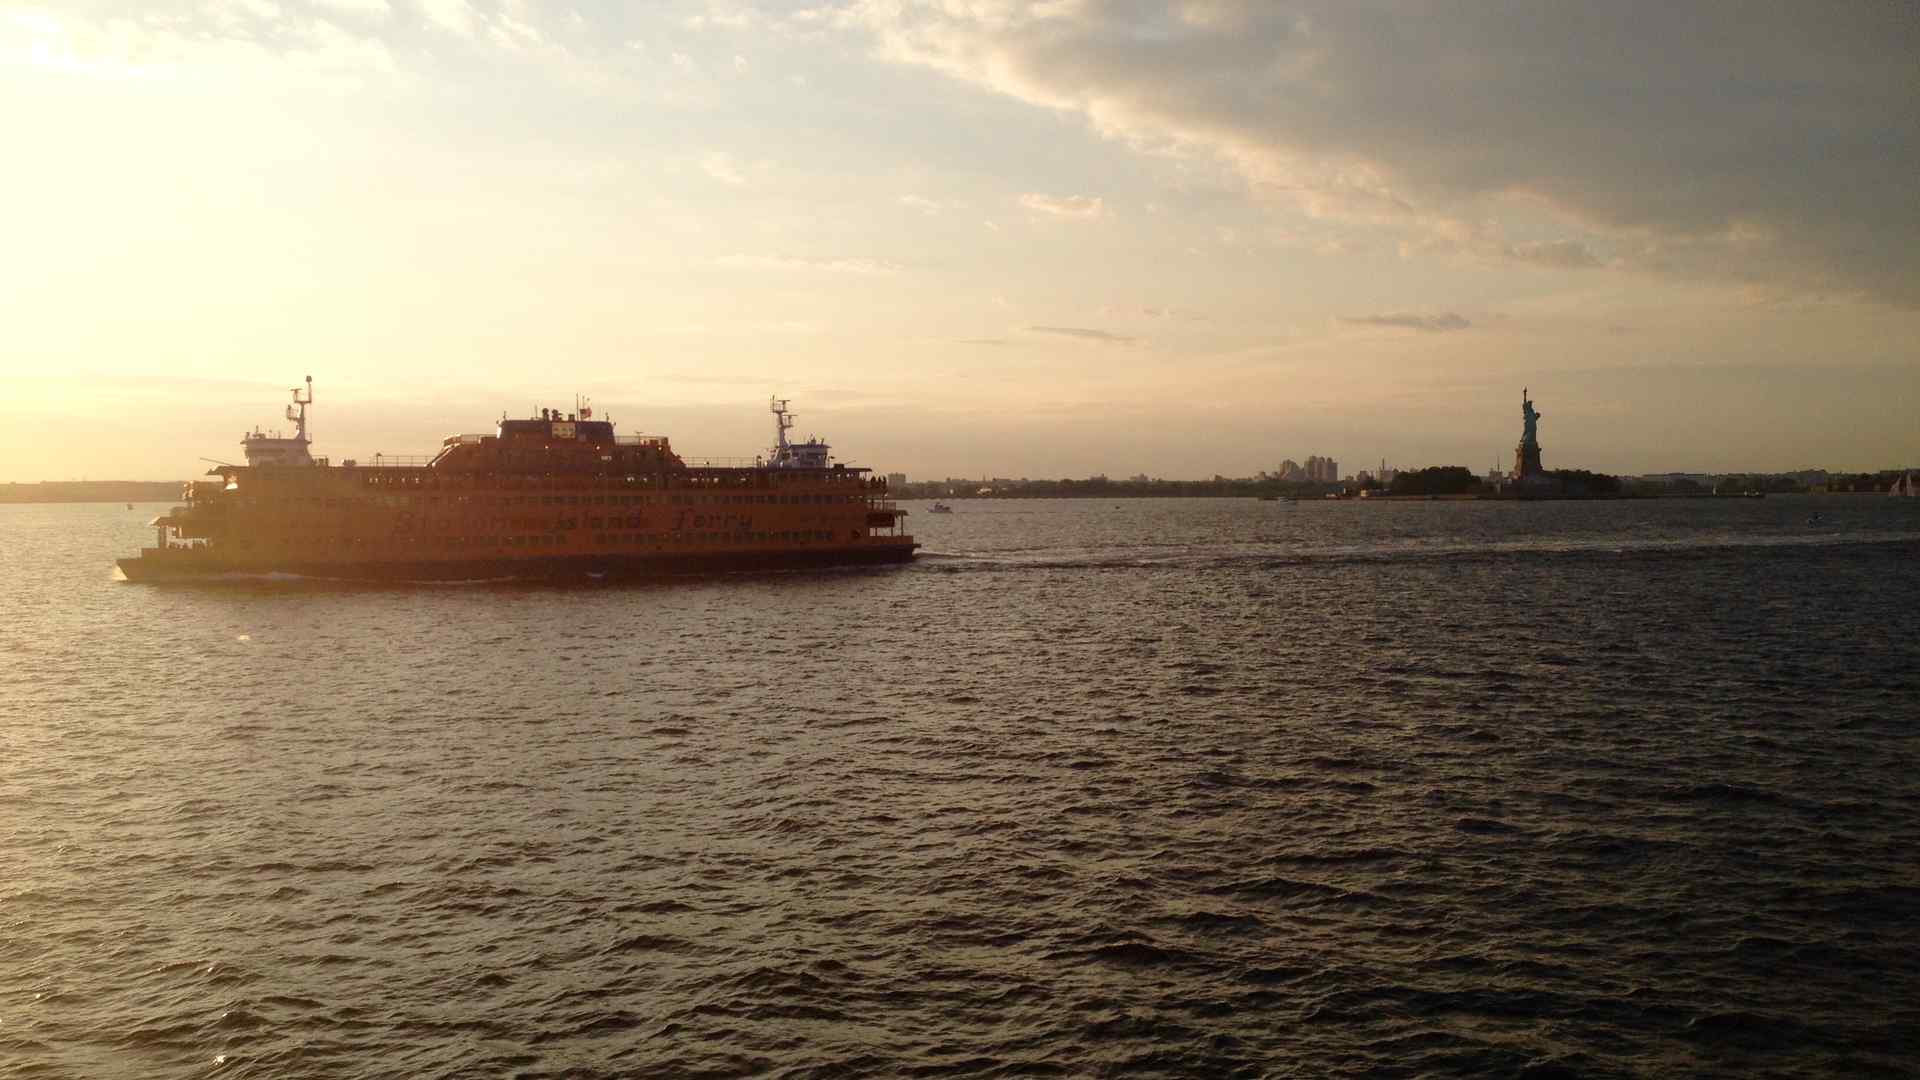 The Staten Island Ferry passes the Statue of Liberty